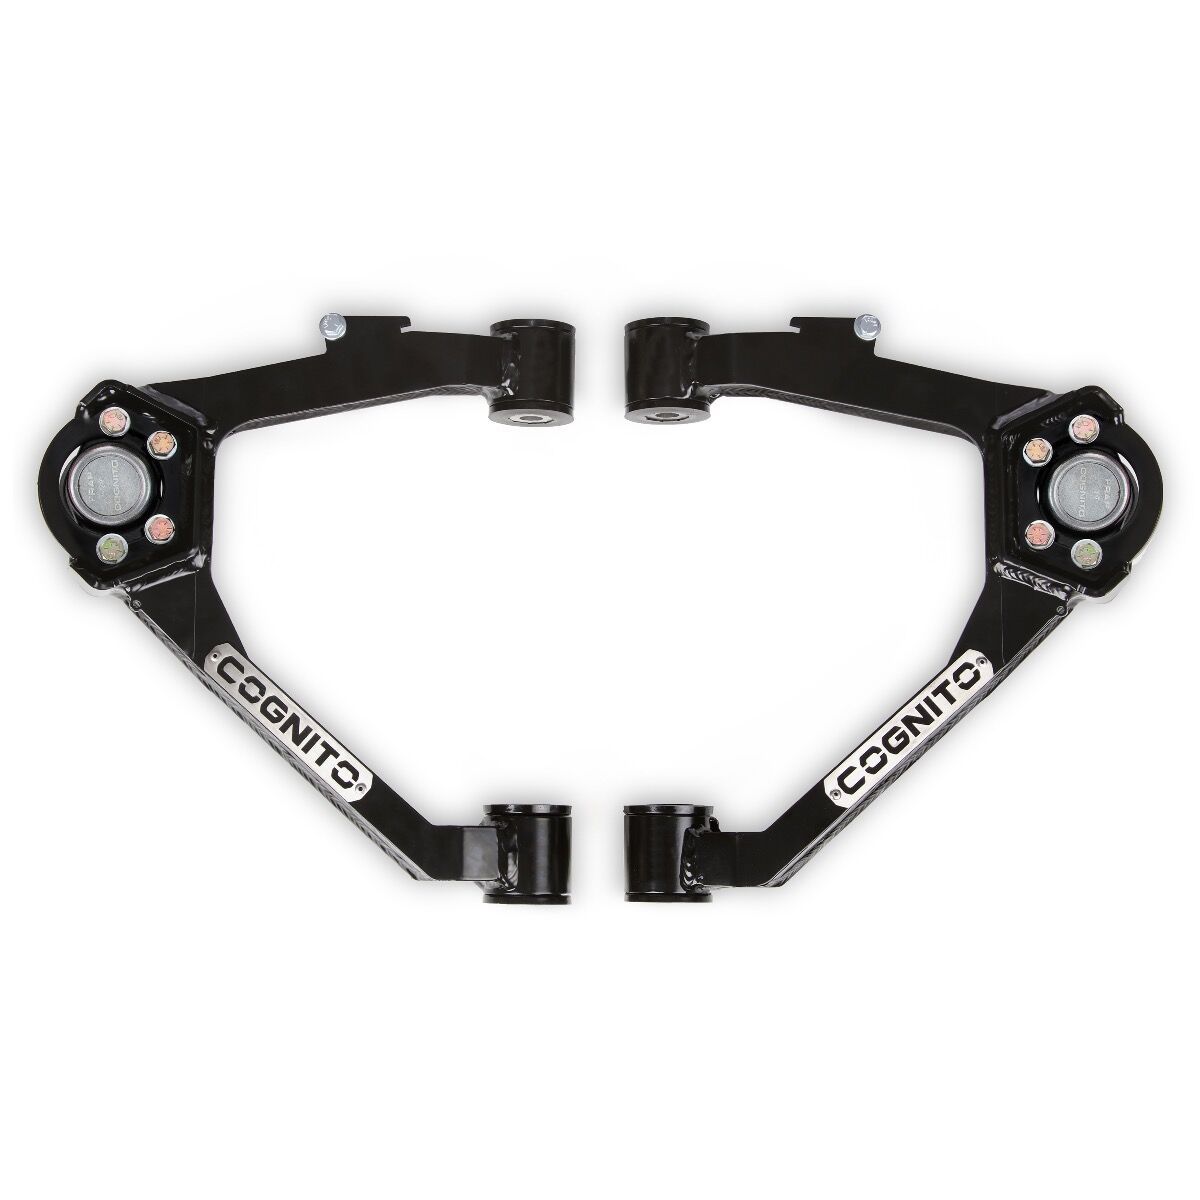 Cognito Motorsports Truck - Cognito Ball Joint SM Series Upper Control Arm Kit For 2007-2018 GM 1500 2WD/4WD